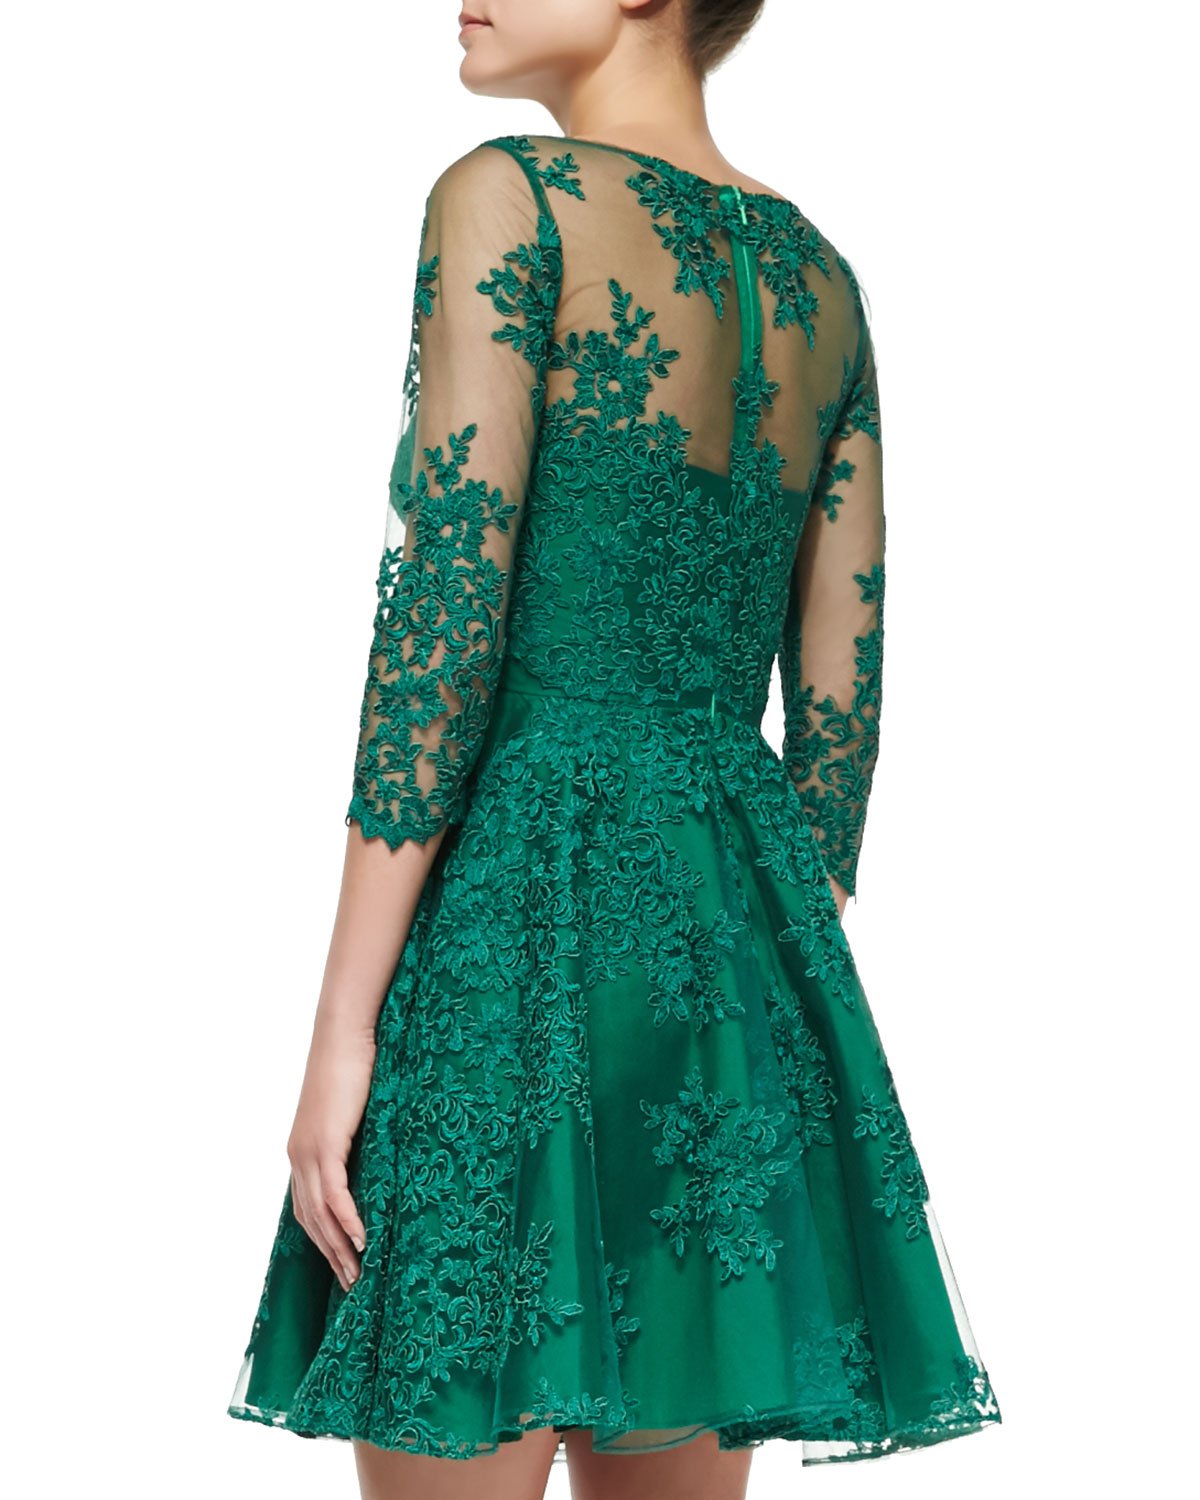 emerald green lace cocktail dress up top